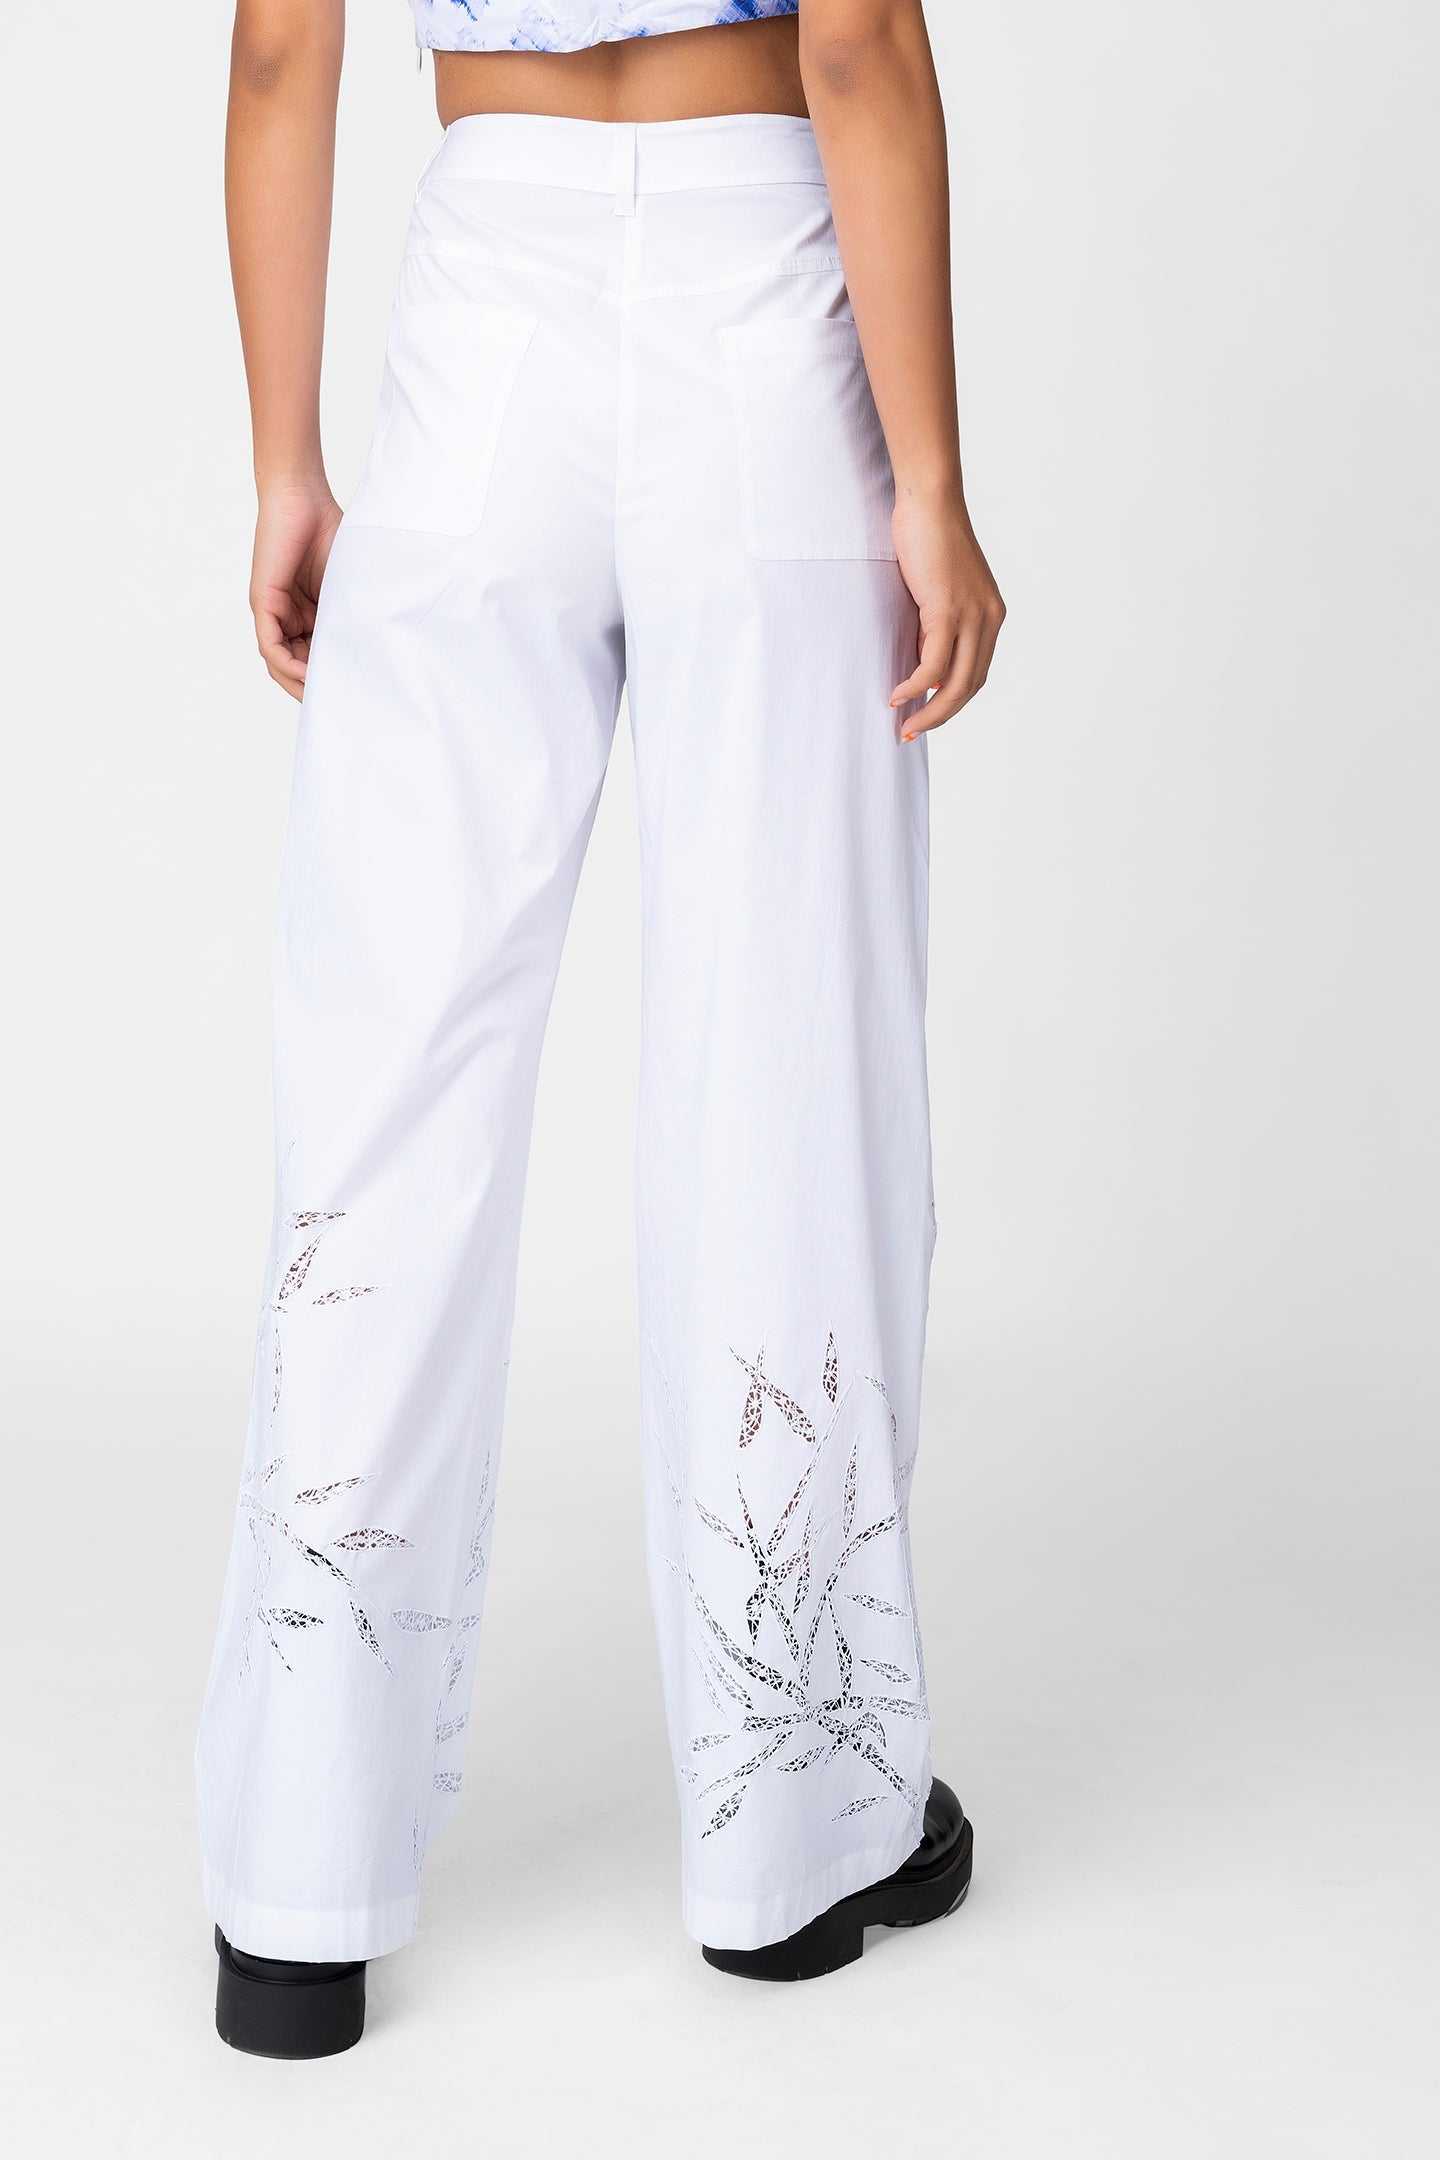 cutwork-embroidered-pants - Genes online store 2020